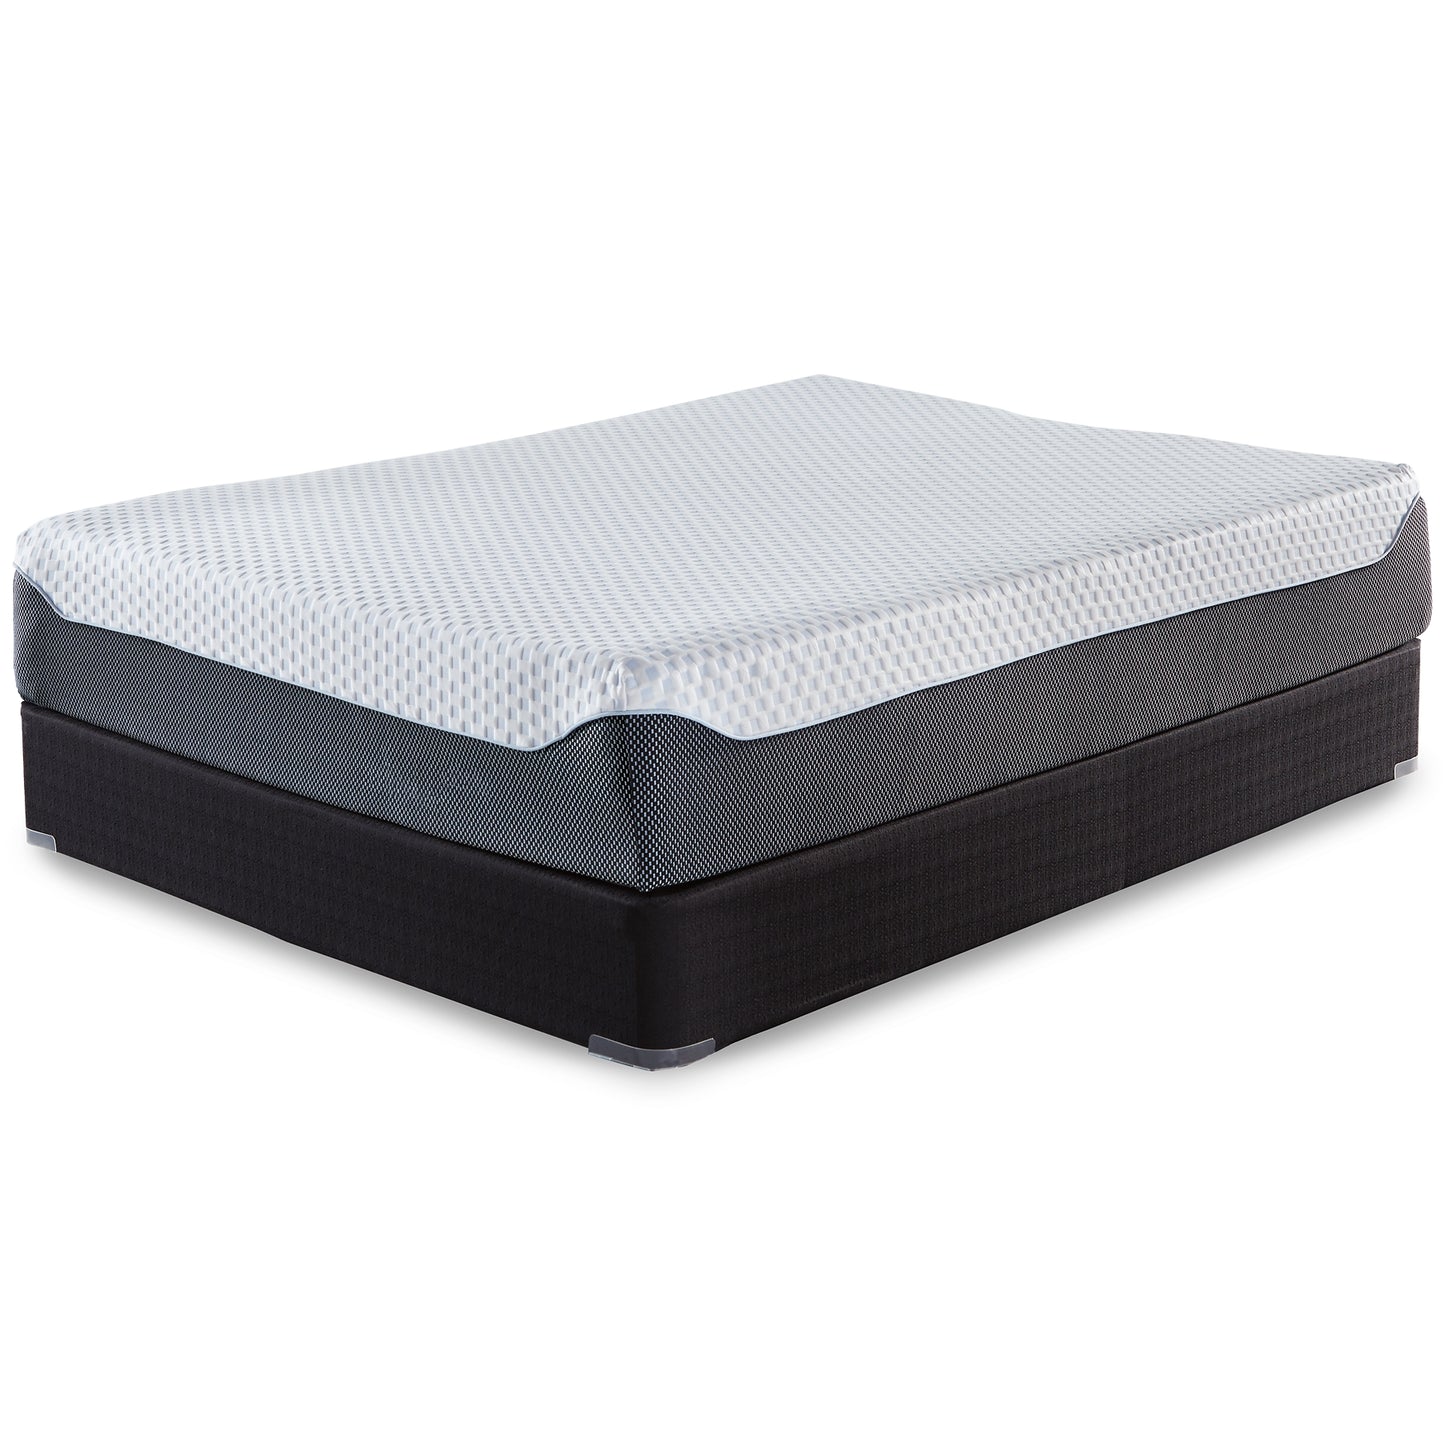 Ashley Express - 12 Inch Chime Elite Mattress with Adjustable Base